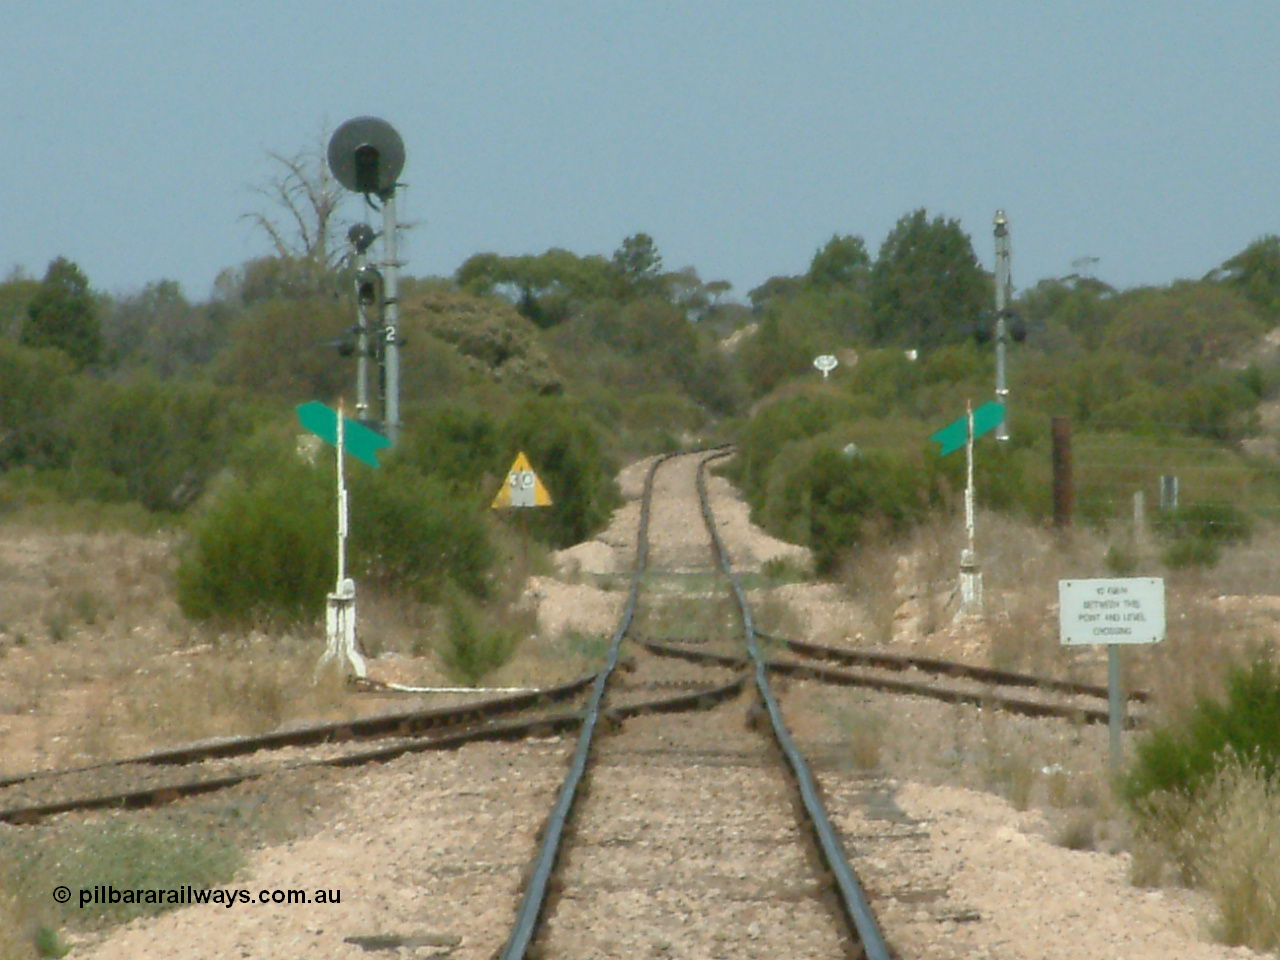 030405 140546
Kyancutta, yard view looking south along the narrow gauge mainline with the siding point levers and indicators with the Eyre Highway grade crossing and one of only two electrically lit signals on the Eyre Peninsula Division. The cast iron 'Yard Limit' sign can be made out in the distance, 5th April 2003.
